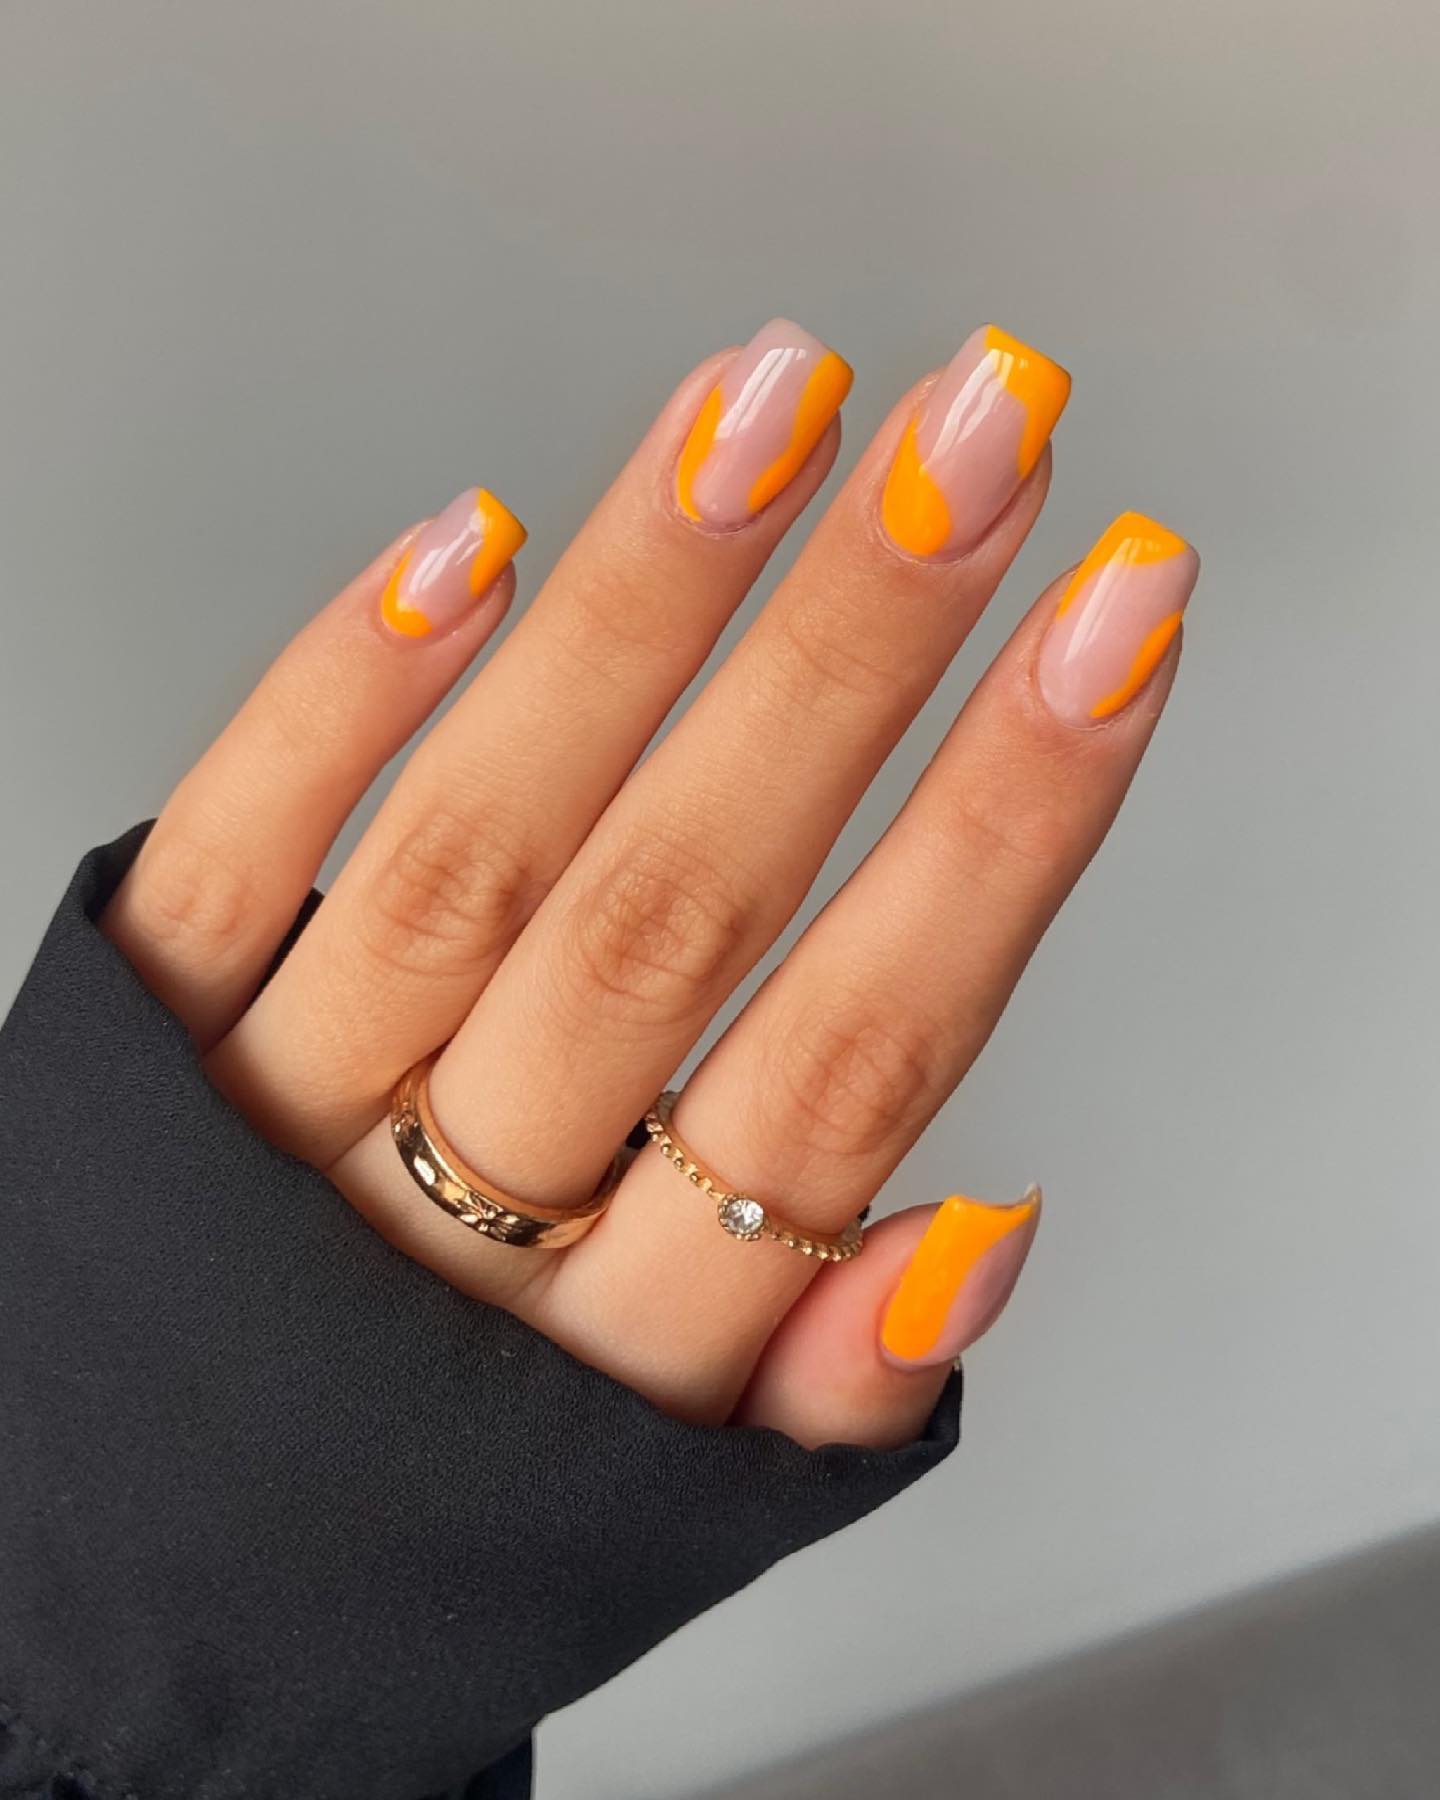 Orange swirl nail art is actually a thing! It's a really fun look that can be done with a lot of different shades of orange, and it's a great way to add some excitement to your nails. Like the one above, you will be ready to rock.